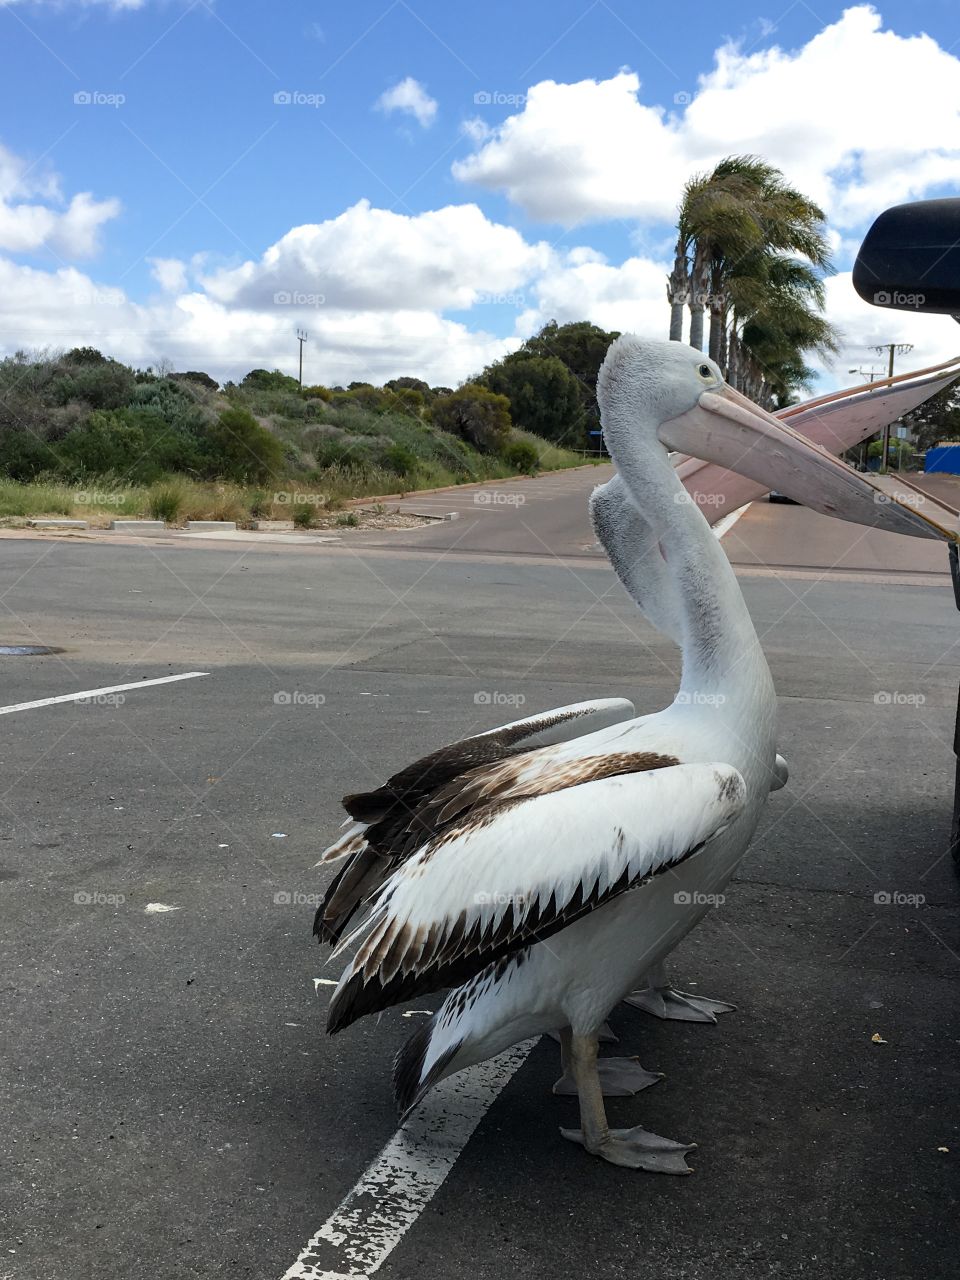 Two large Pelicans begging for food from
People in parked car